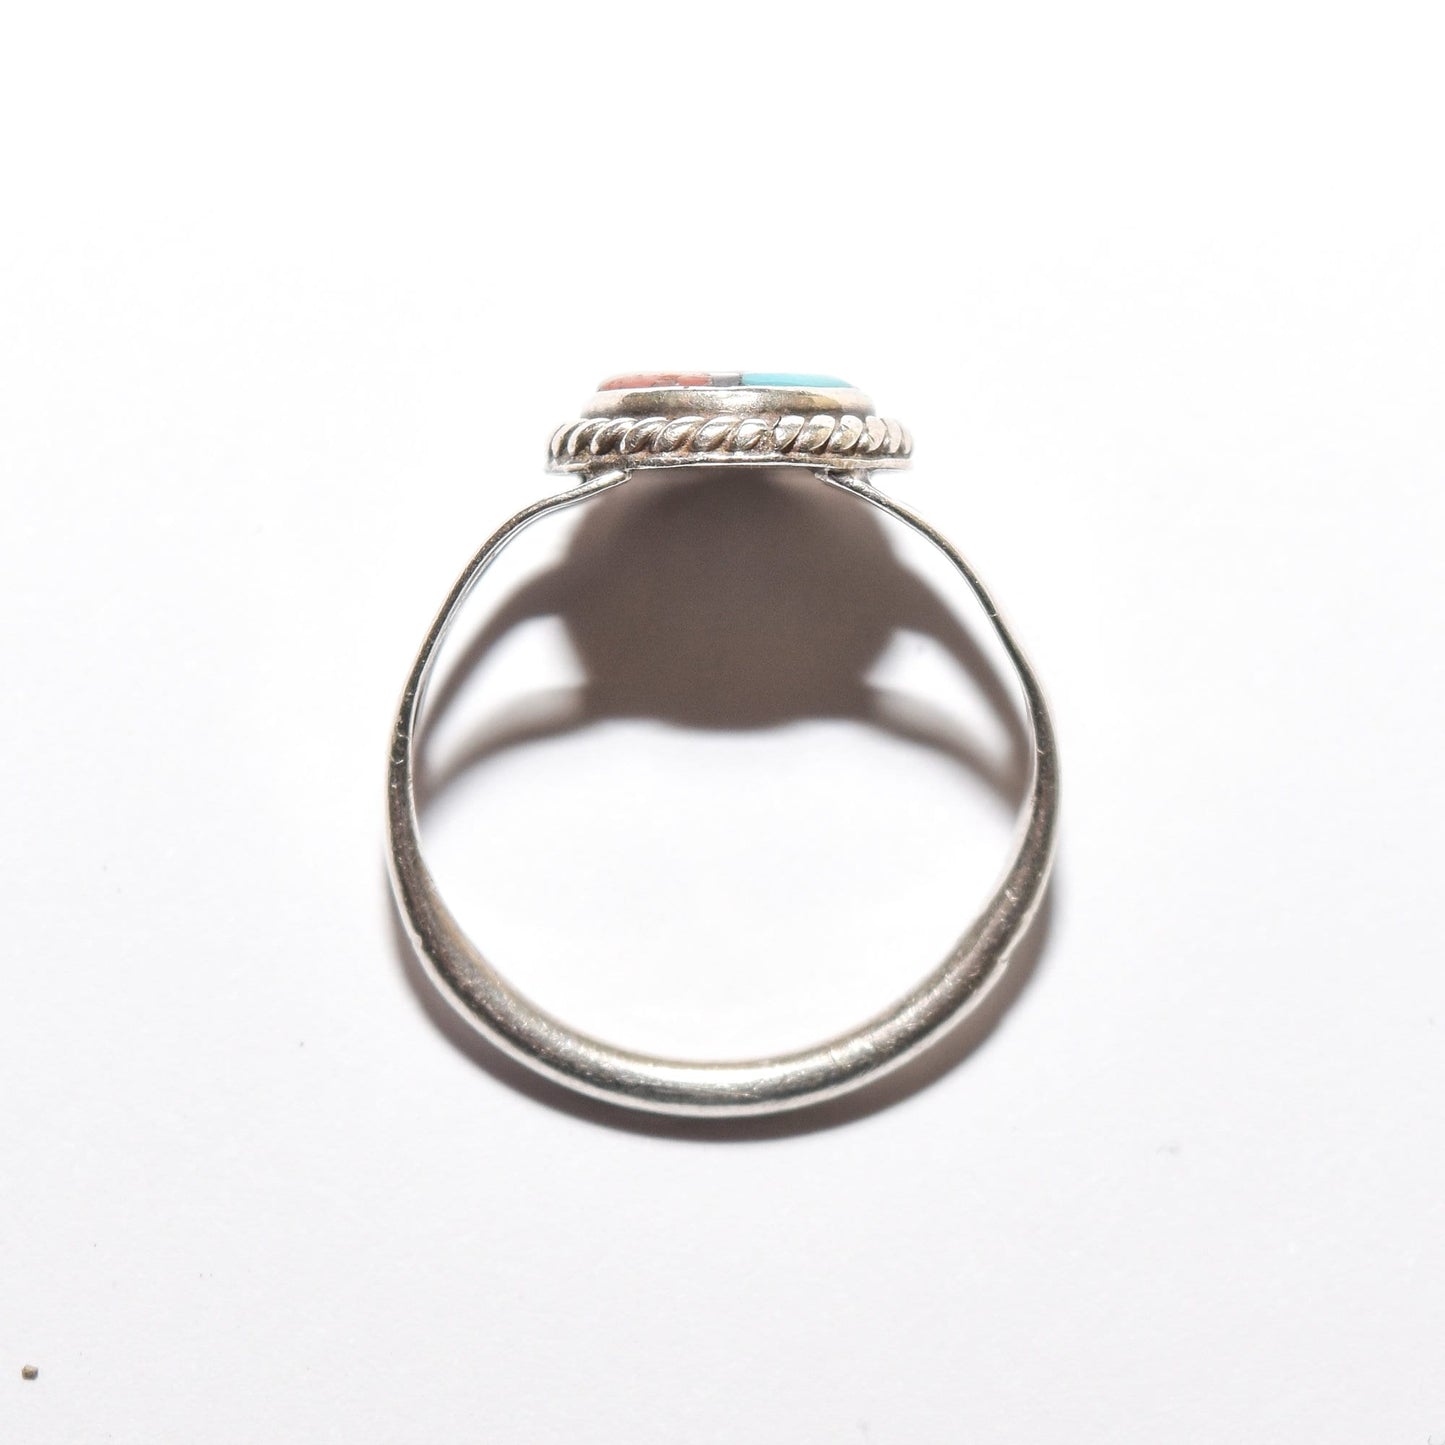 Native American Zuni Sun Face ring in sterling silver with inlay detail, size 5.25 US, perfect for stacking, on a white background.